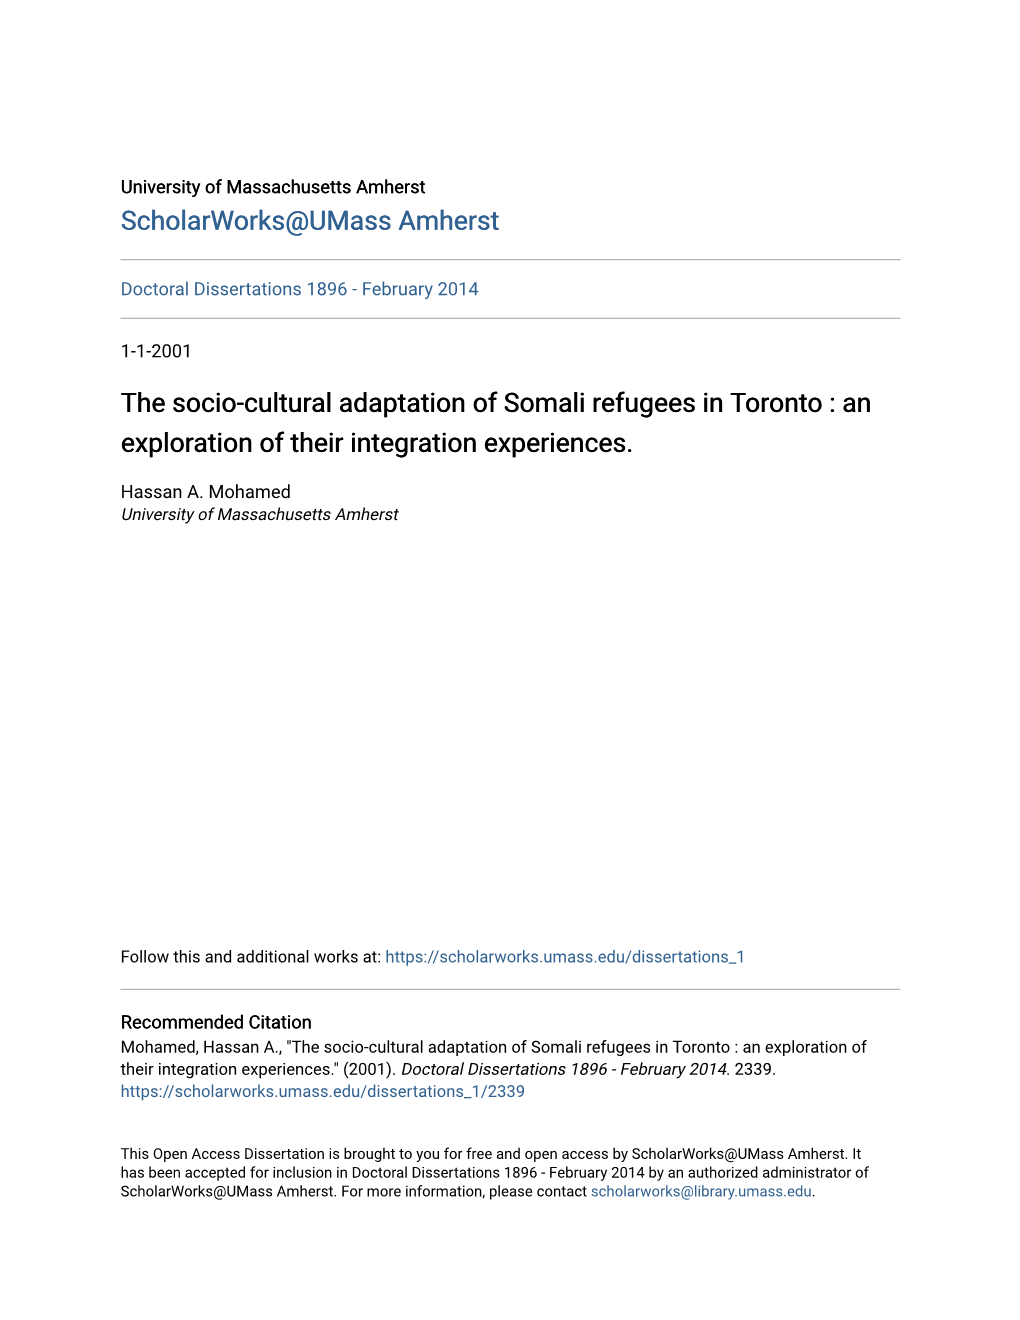 The Socio-Cultural Adaptation of Somali Refugees in Toronto : an Exploration of Their Integration Experiences